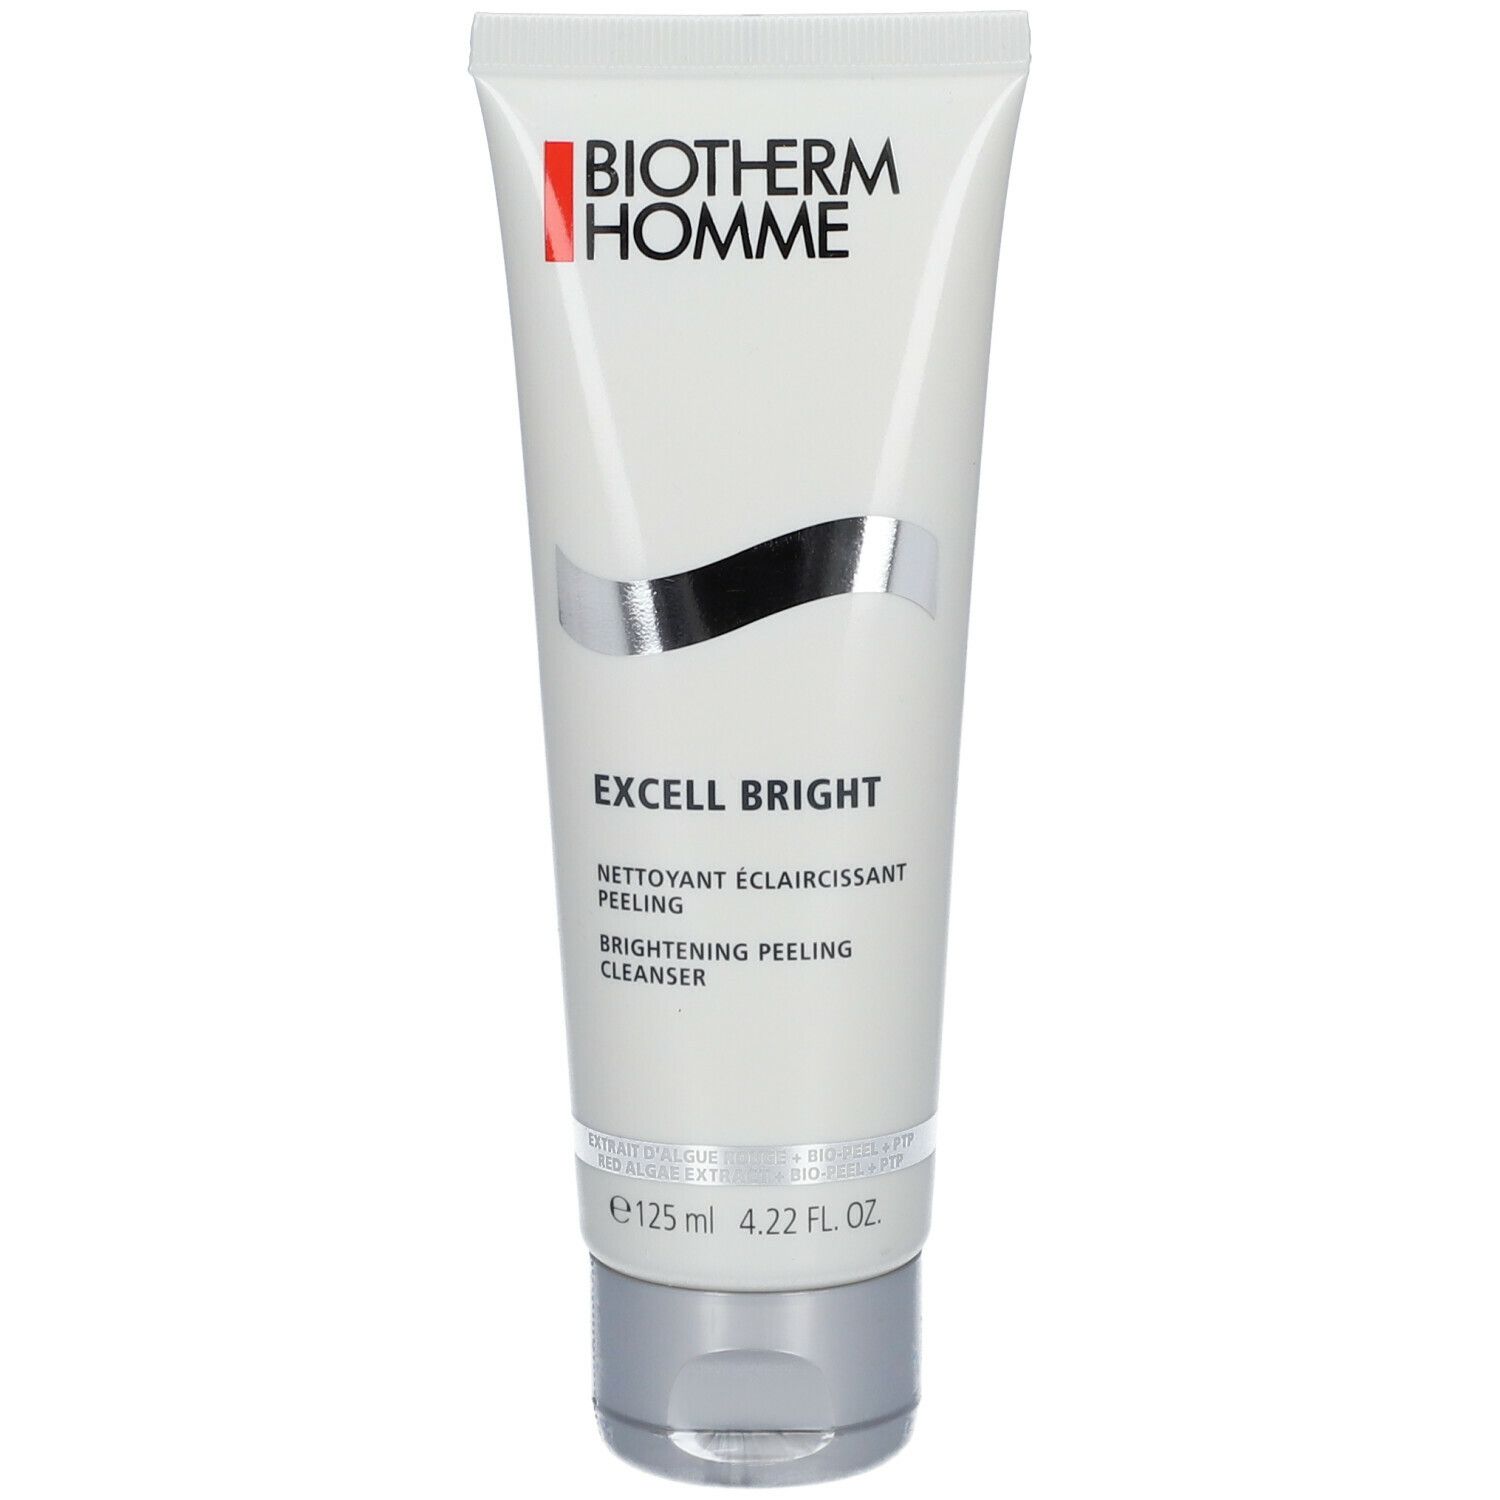 Biotherm Homme Excell Bright Nettoyant Éclaircissant